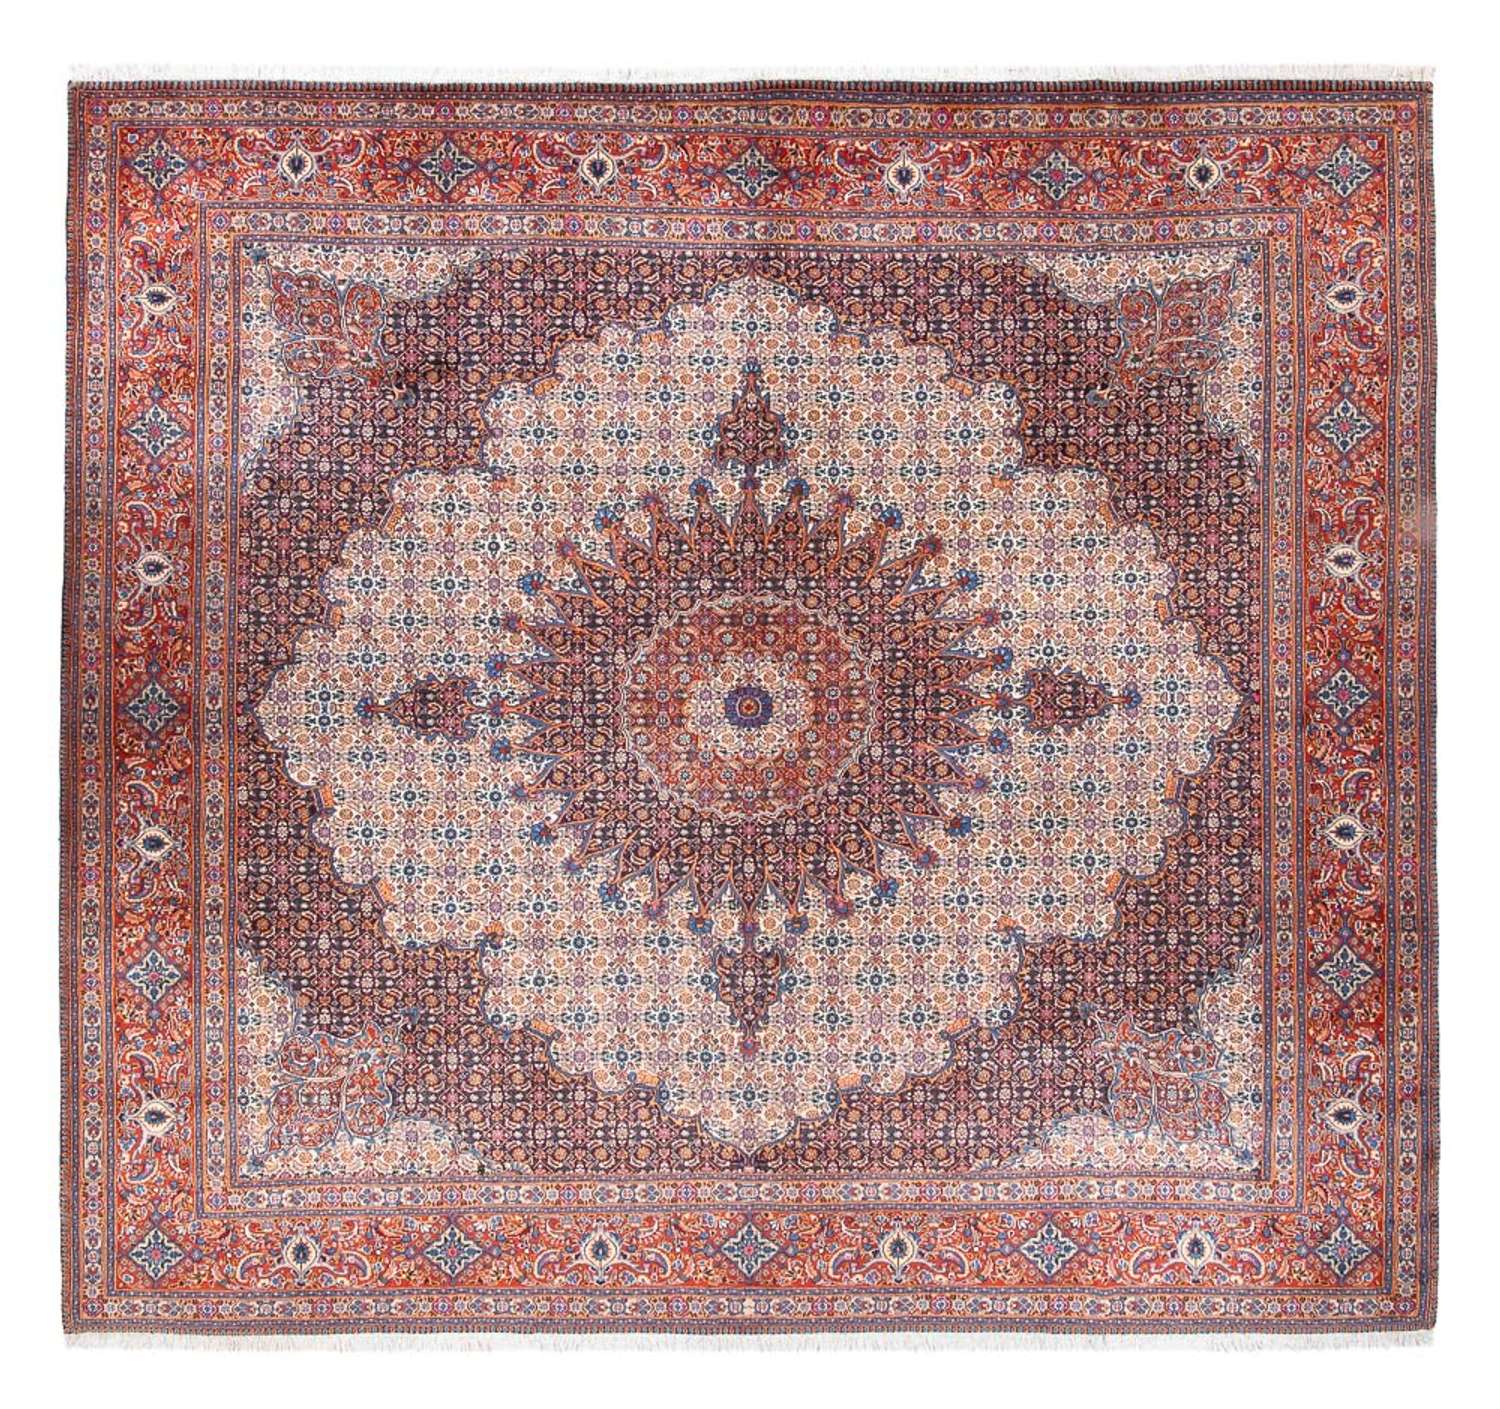 Perser Rug - Classic square  - 307 x 300 cm - brown